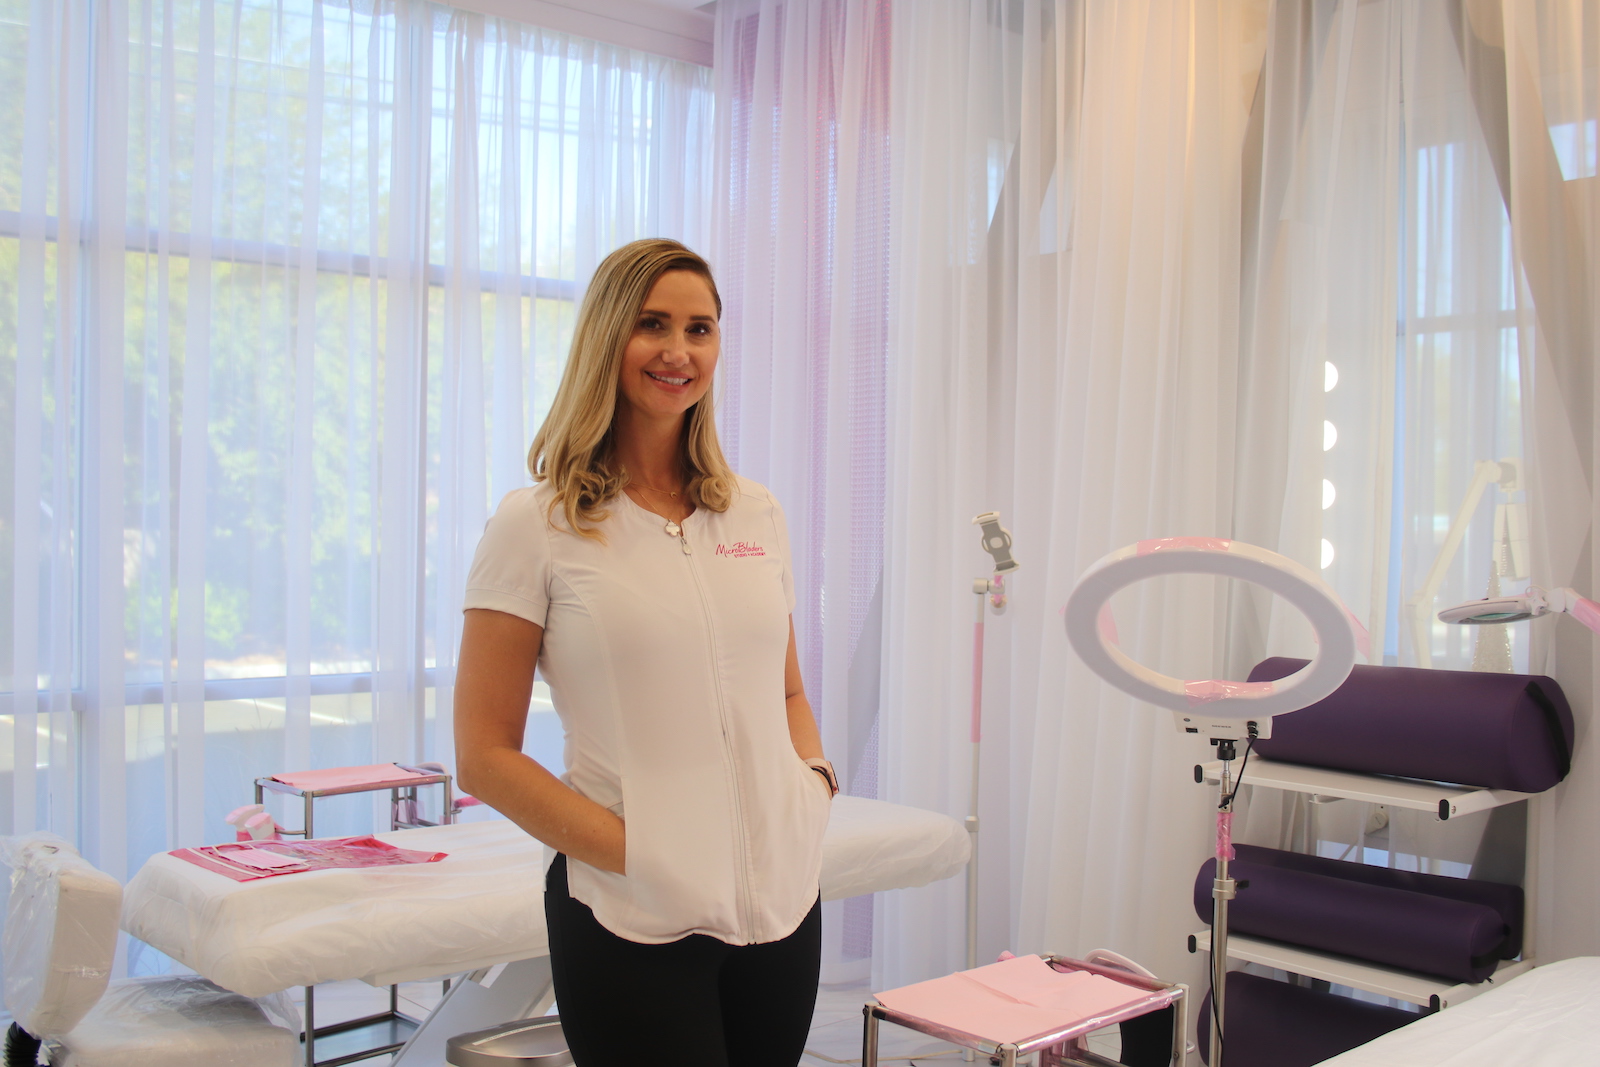 5 Traits of an Amazing Microblading Instructor